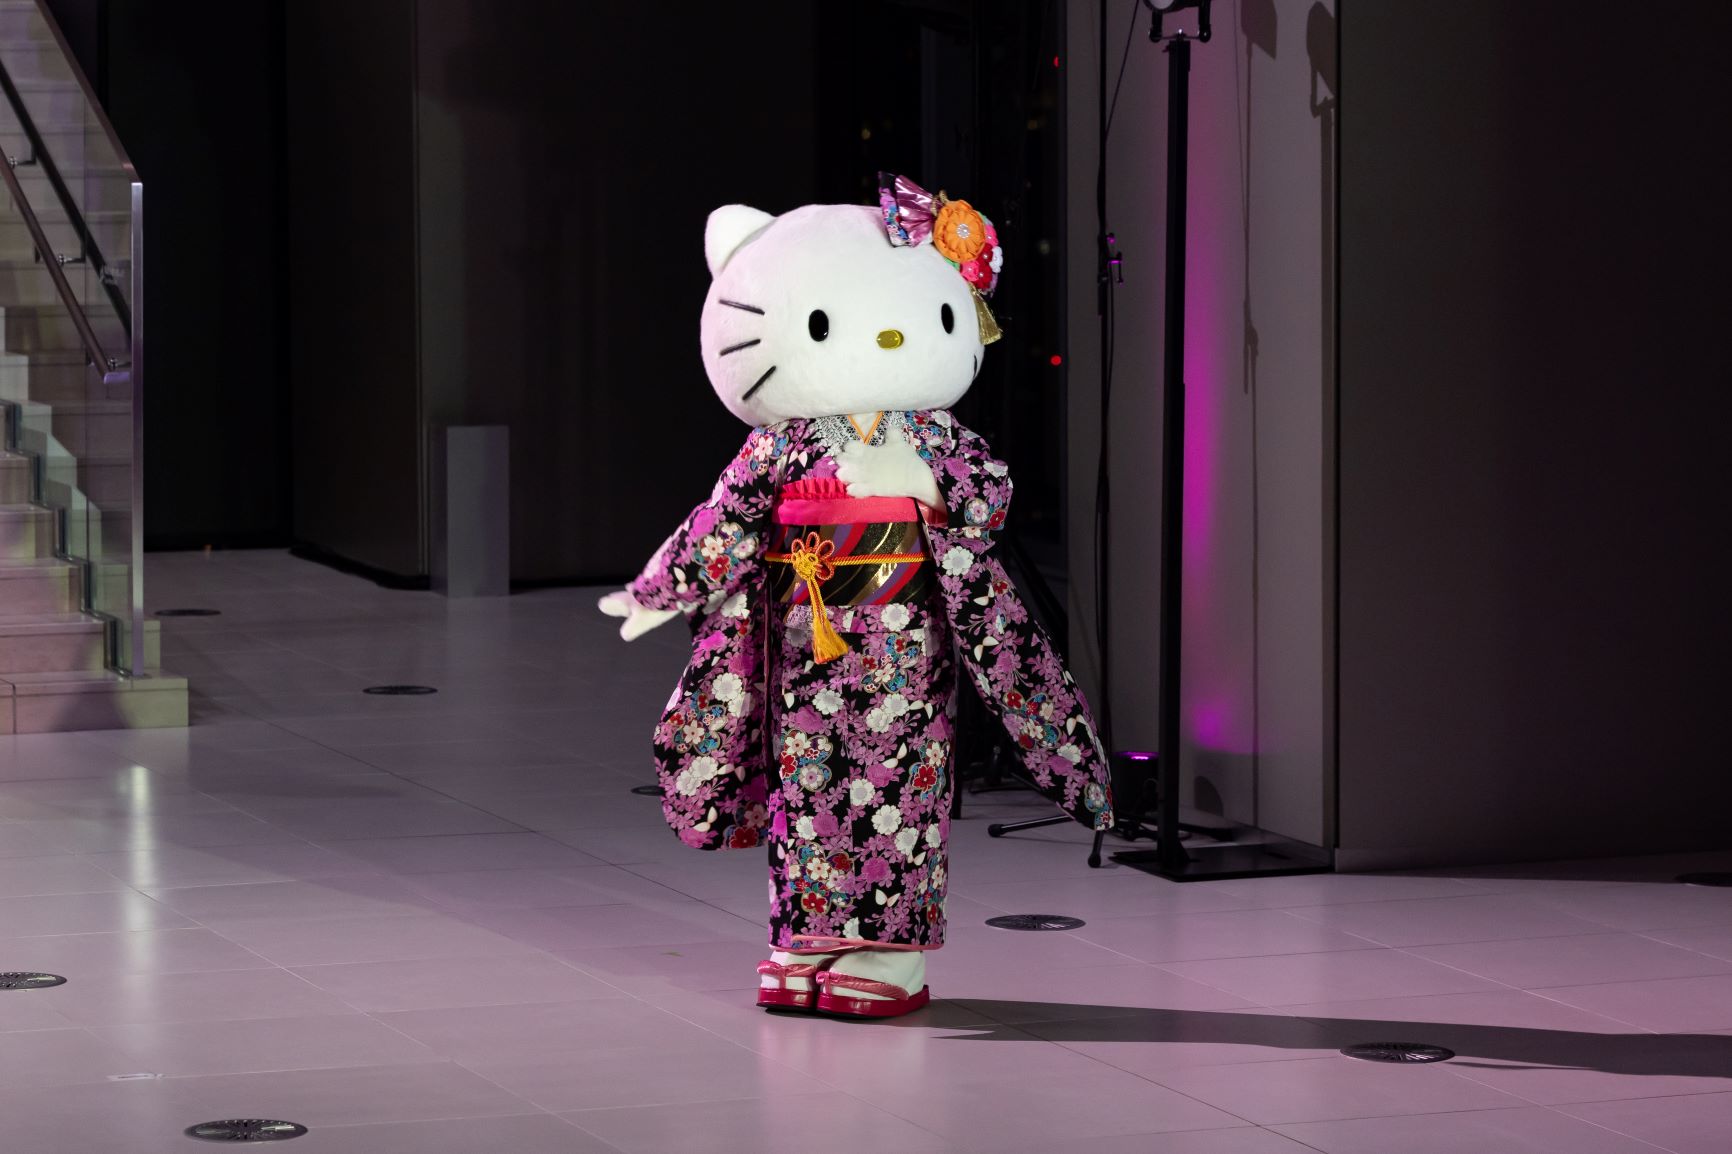 Data on 3.3 million Hello Kitty fans sat out in open, researcher says - CNET